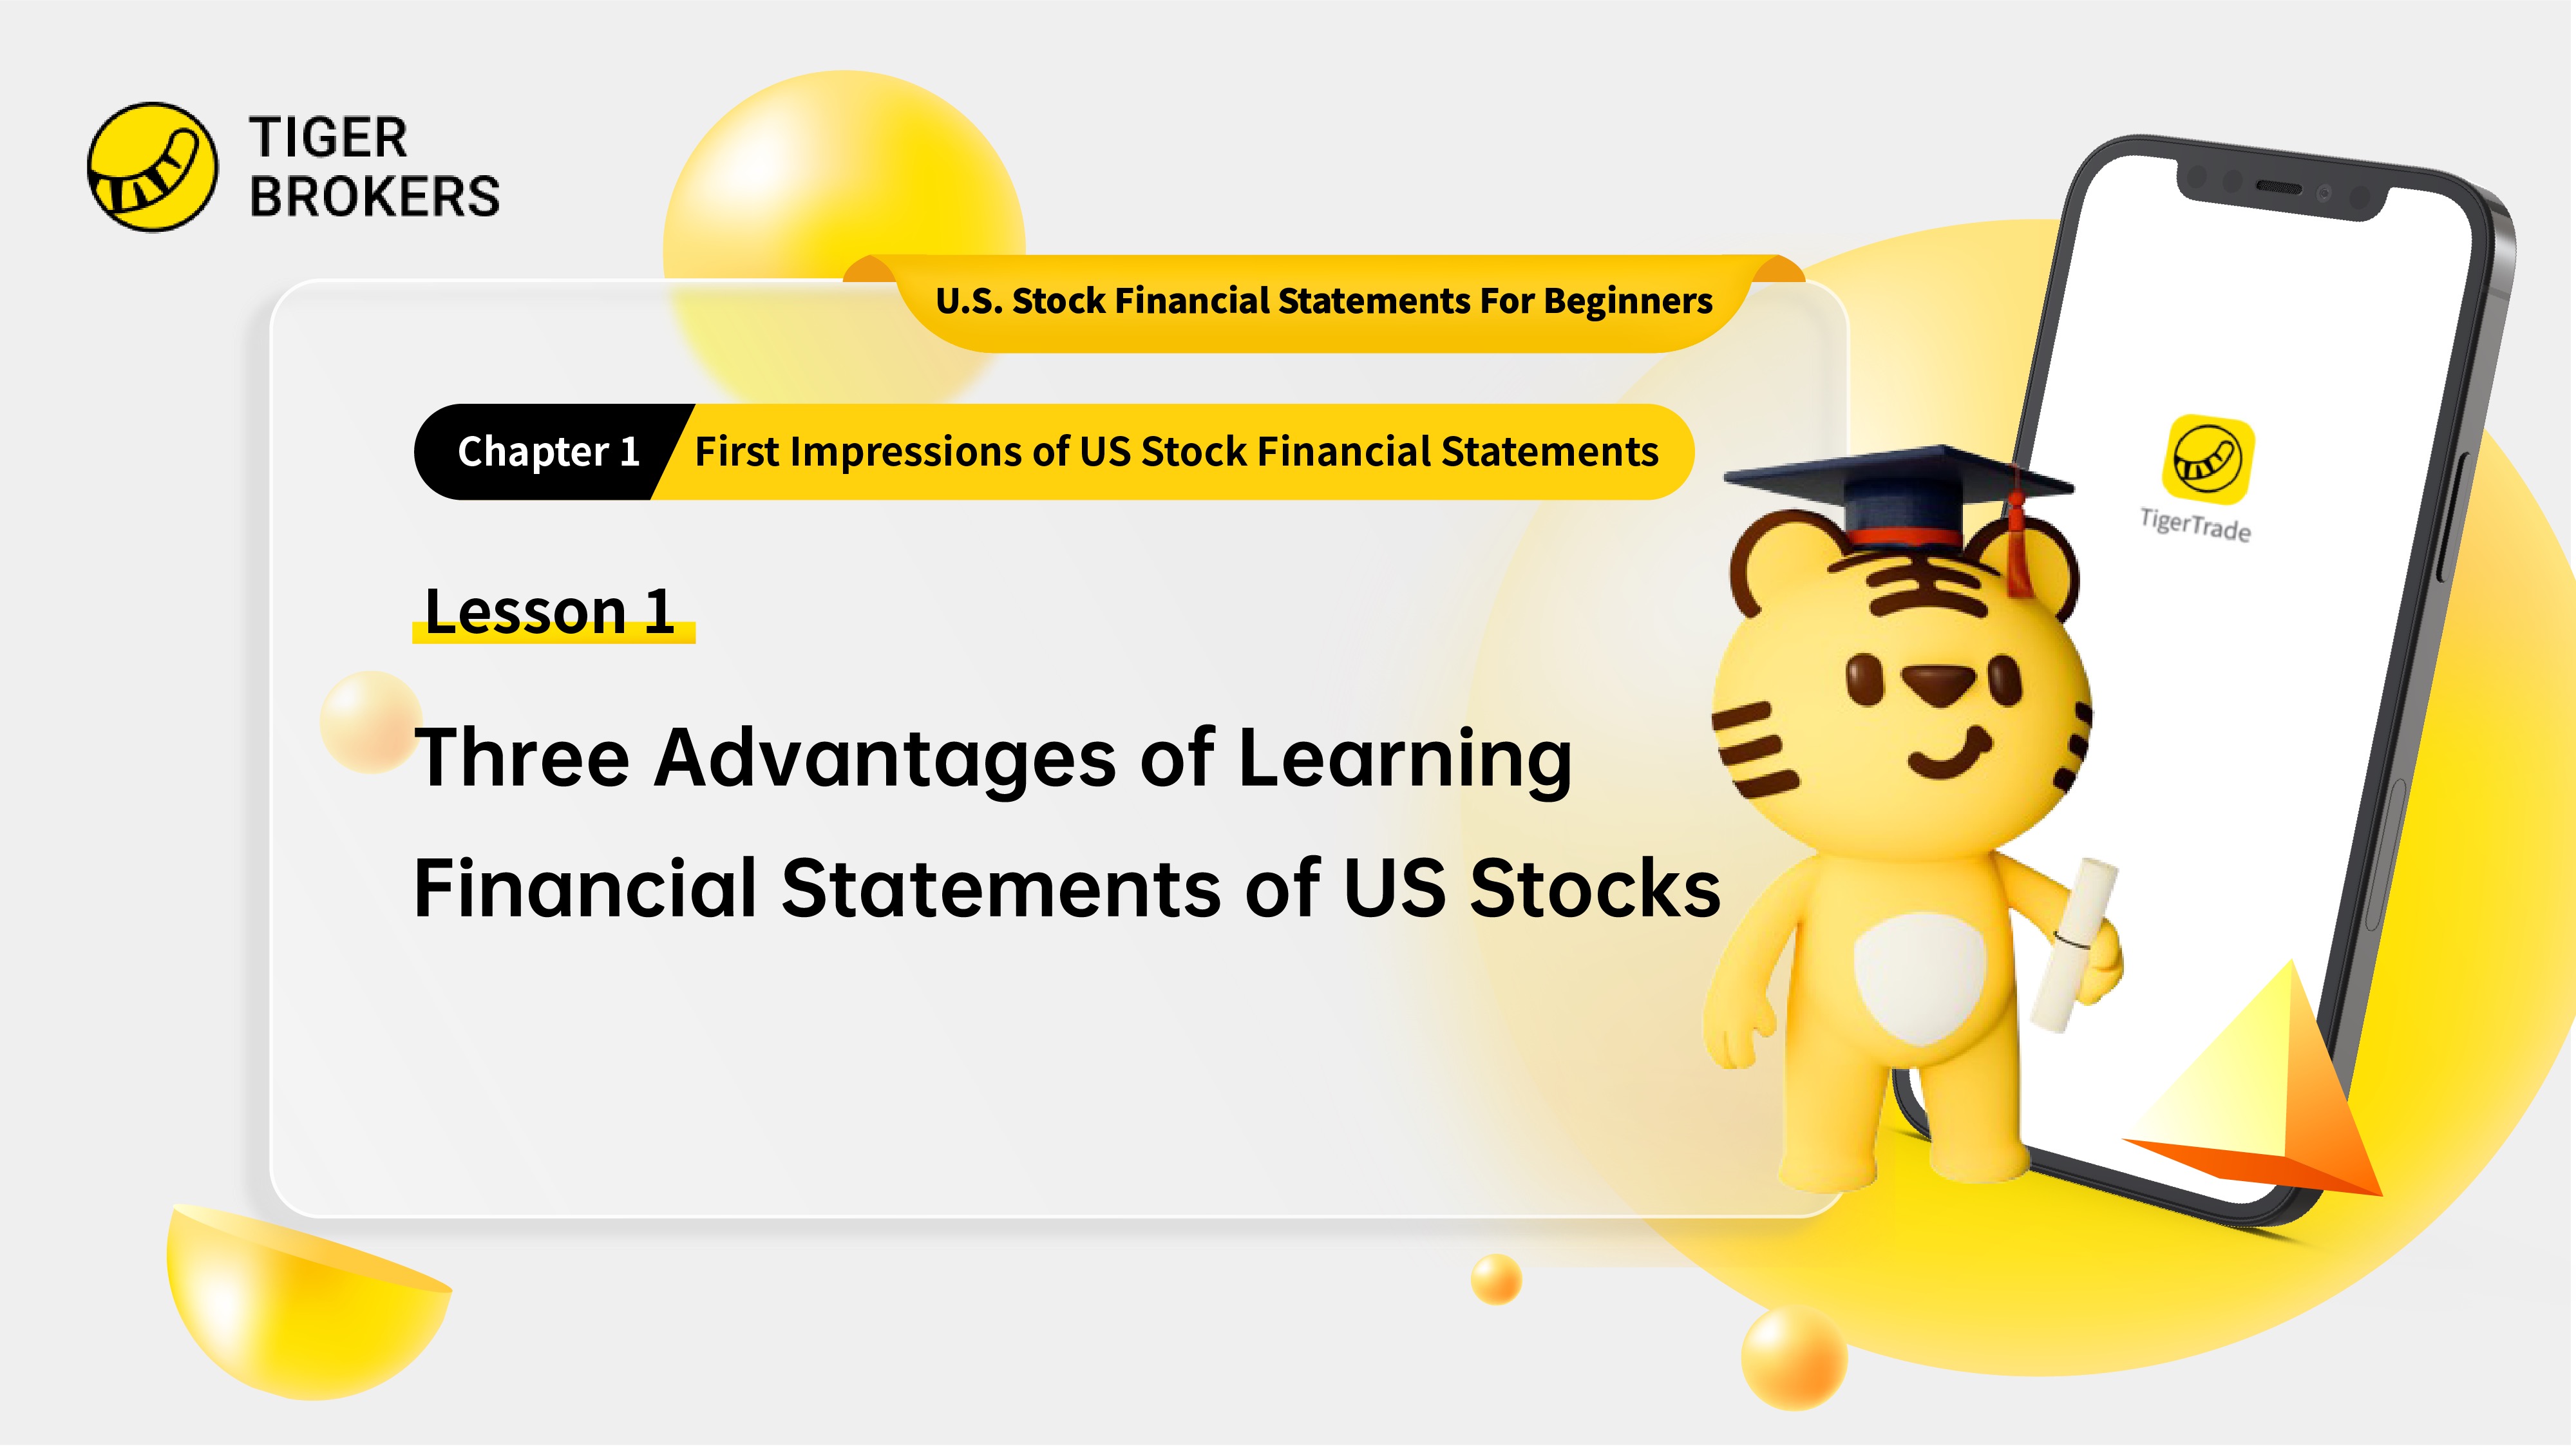 Lesson 1: Three advantages of learning financial statements